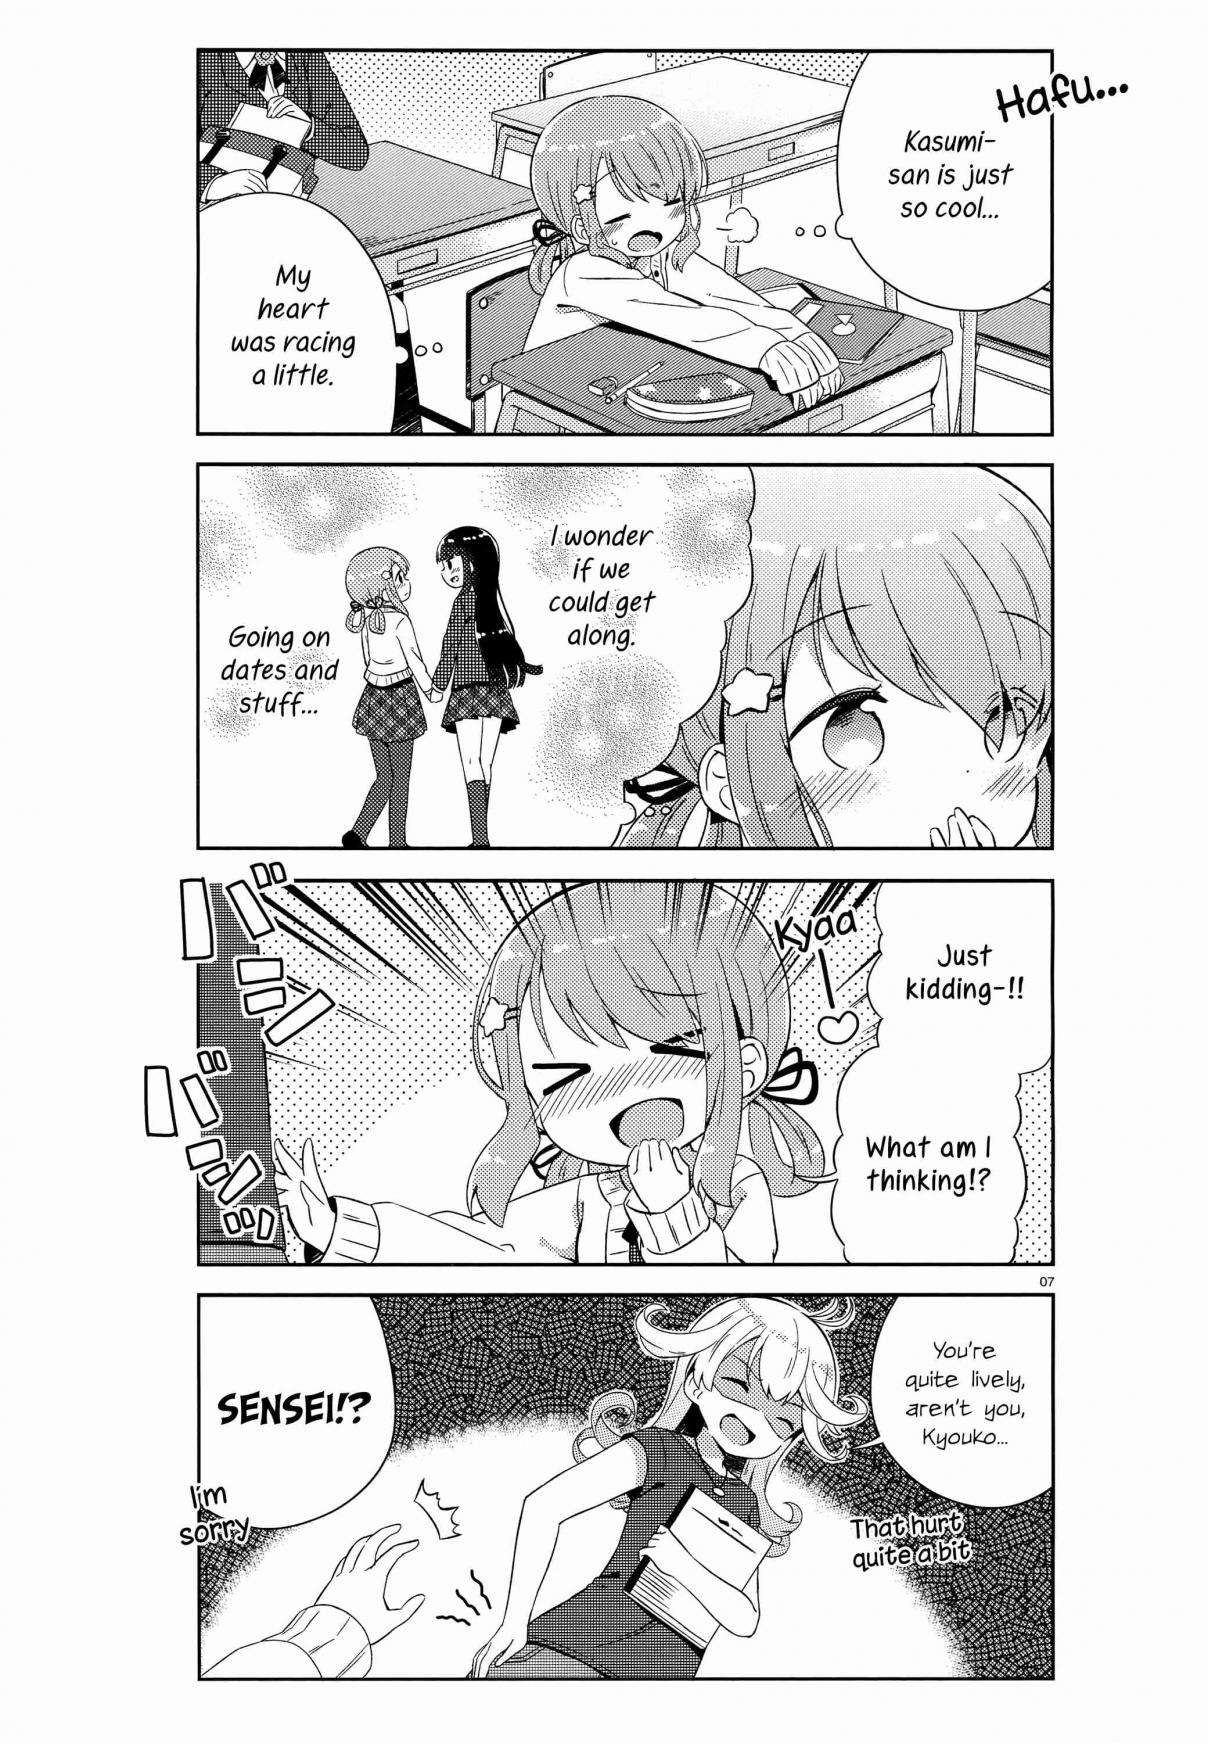 She Gets Girls Every day. Vol. 1 Ch. 1 The secret of the handsome beauty.